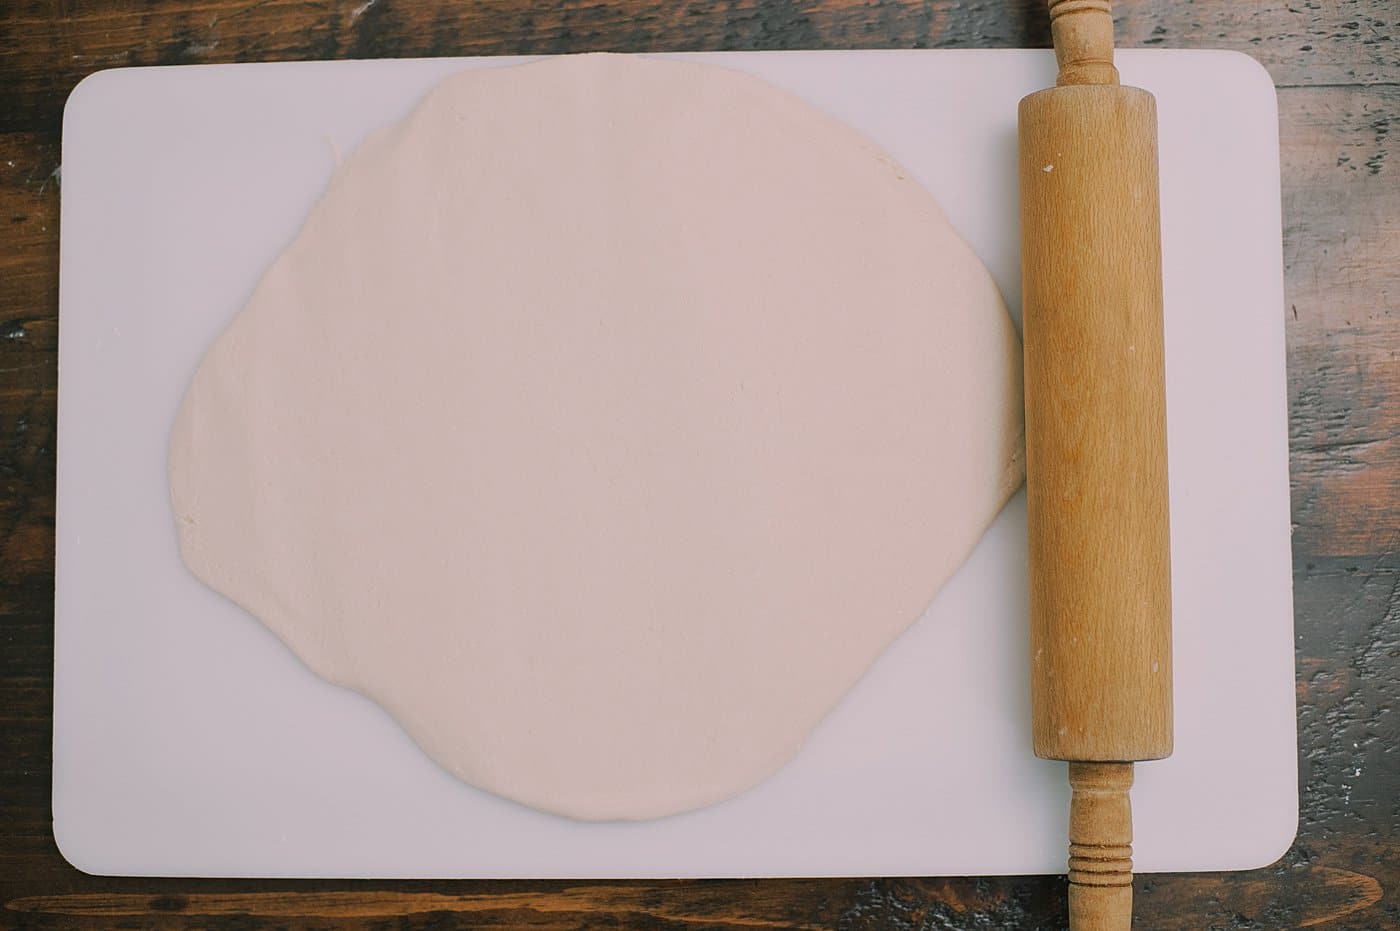 Roll out salt dough into a thin layer before cutting into shapes.